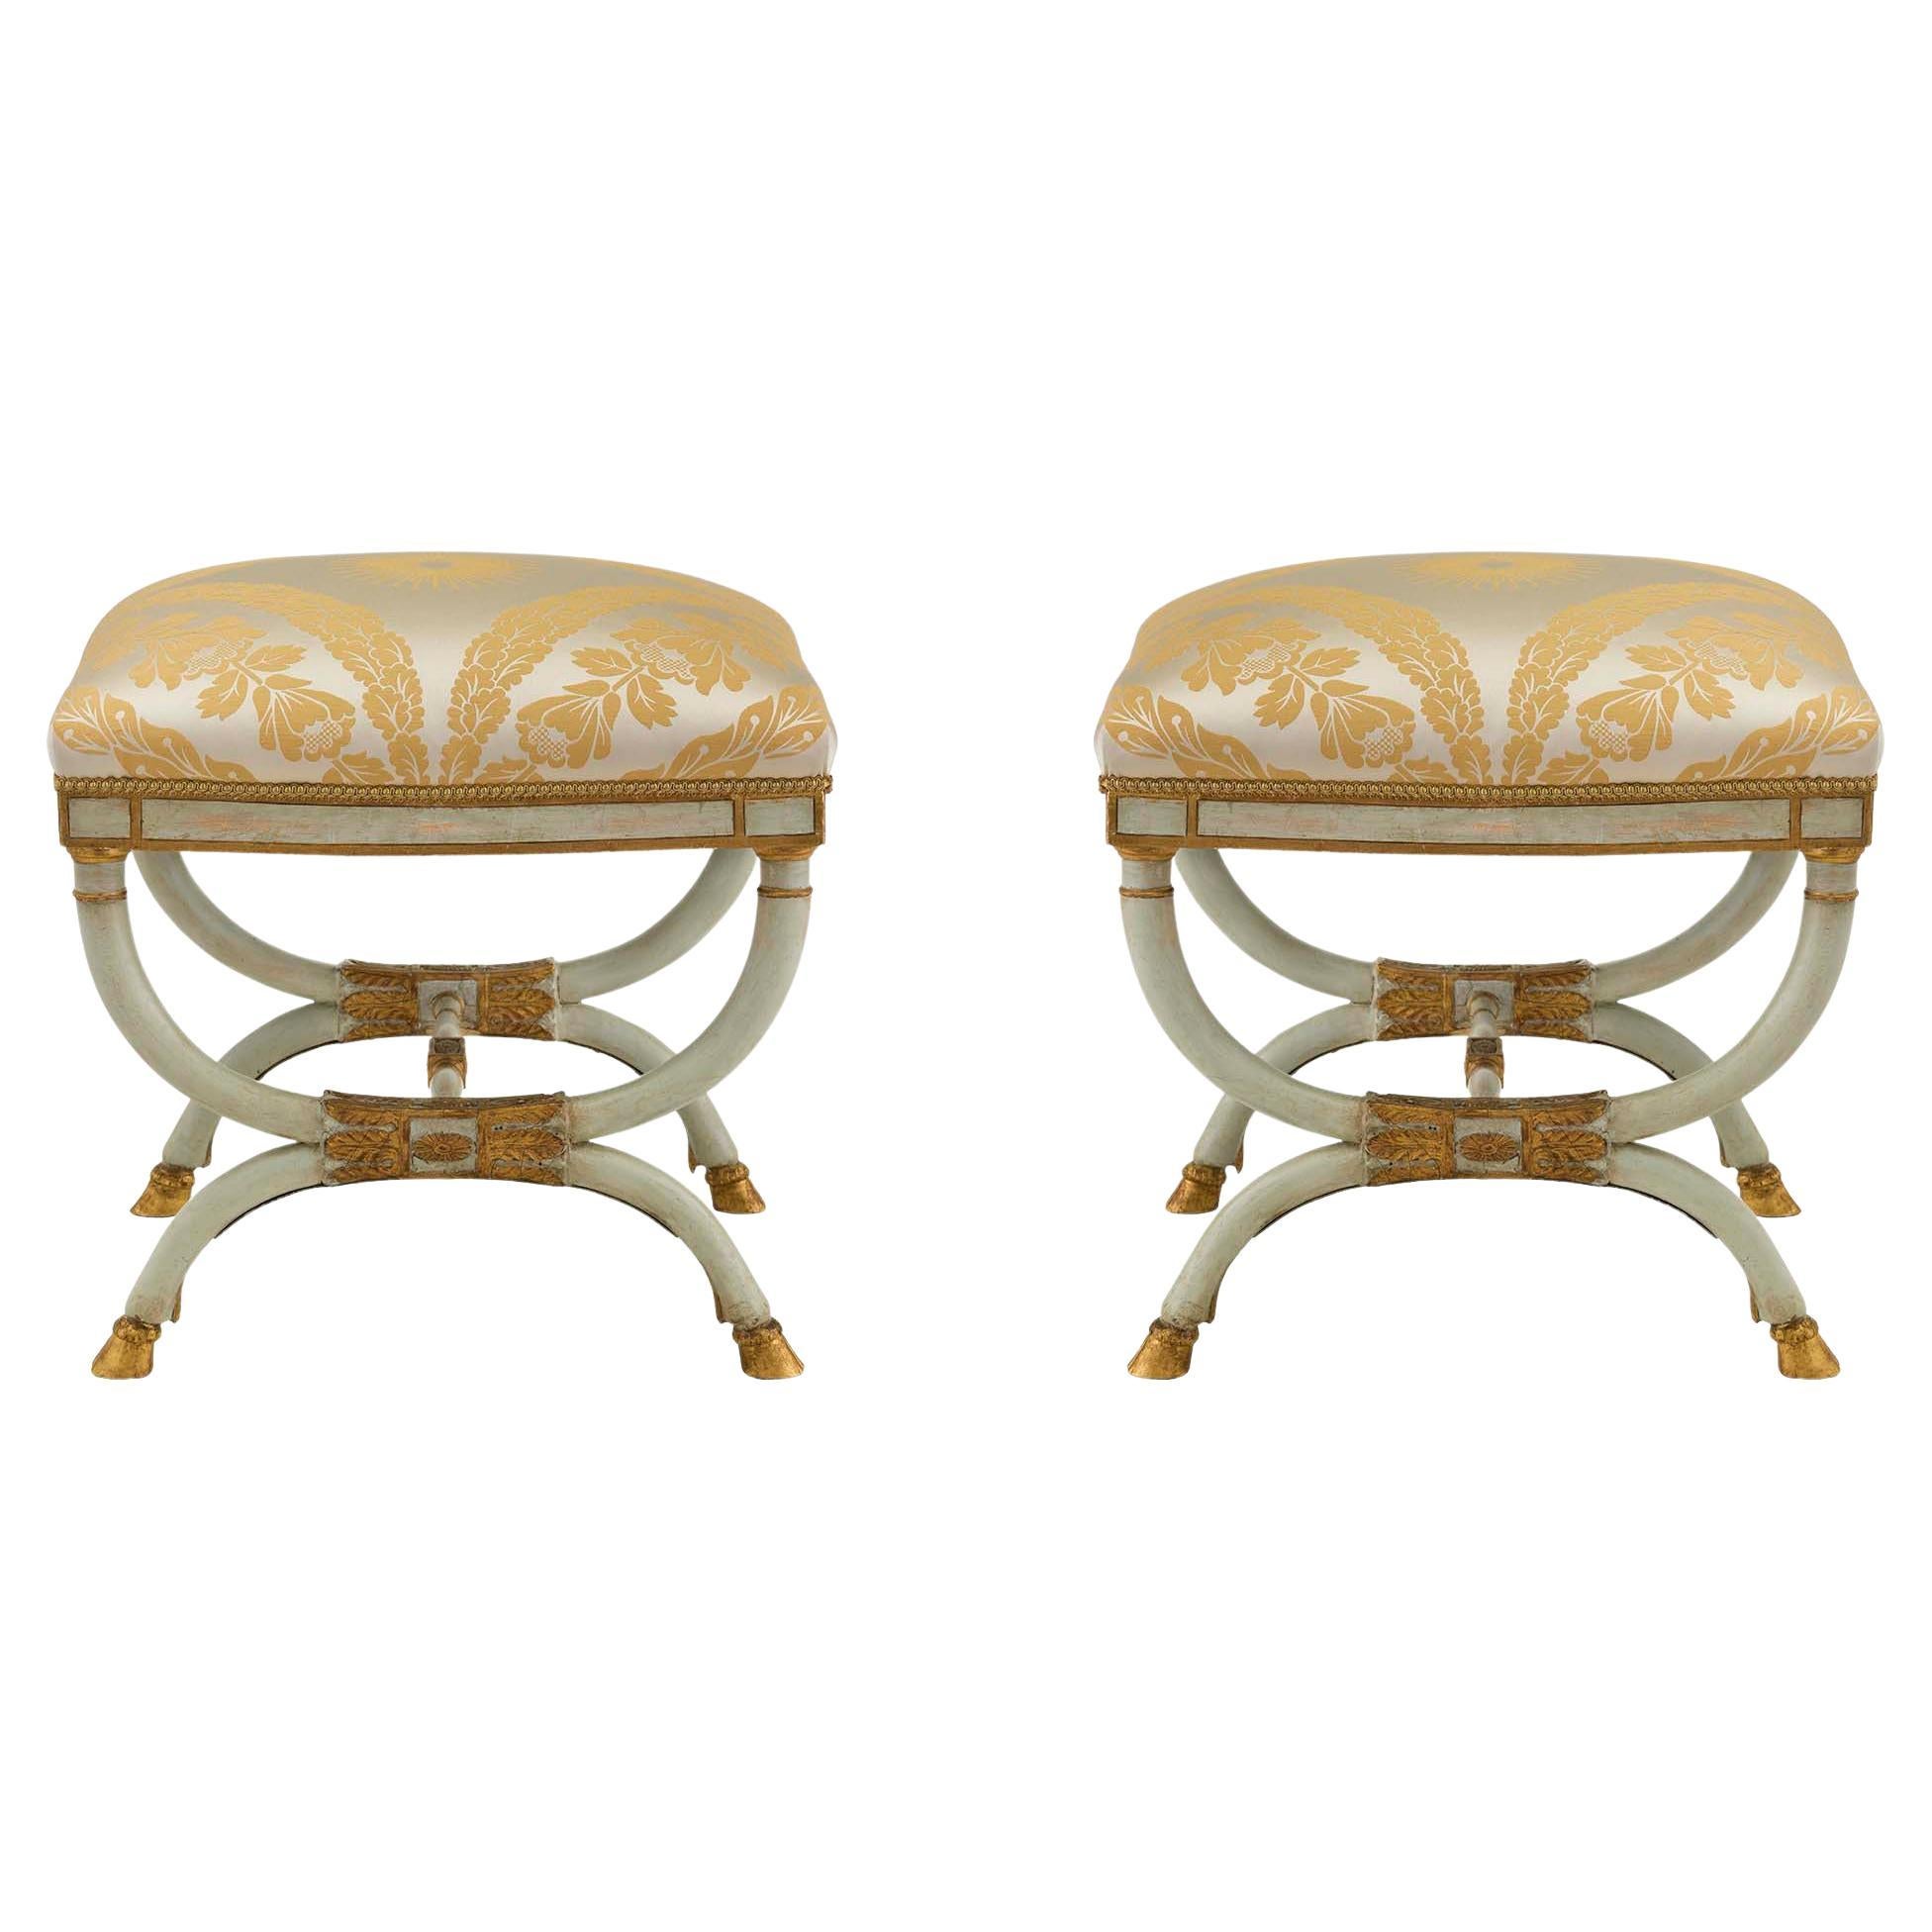 Pair of Italian Early 19th Century Neoclassical Style Patinated and Gilt Benches